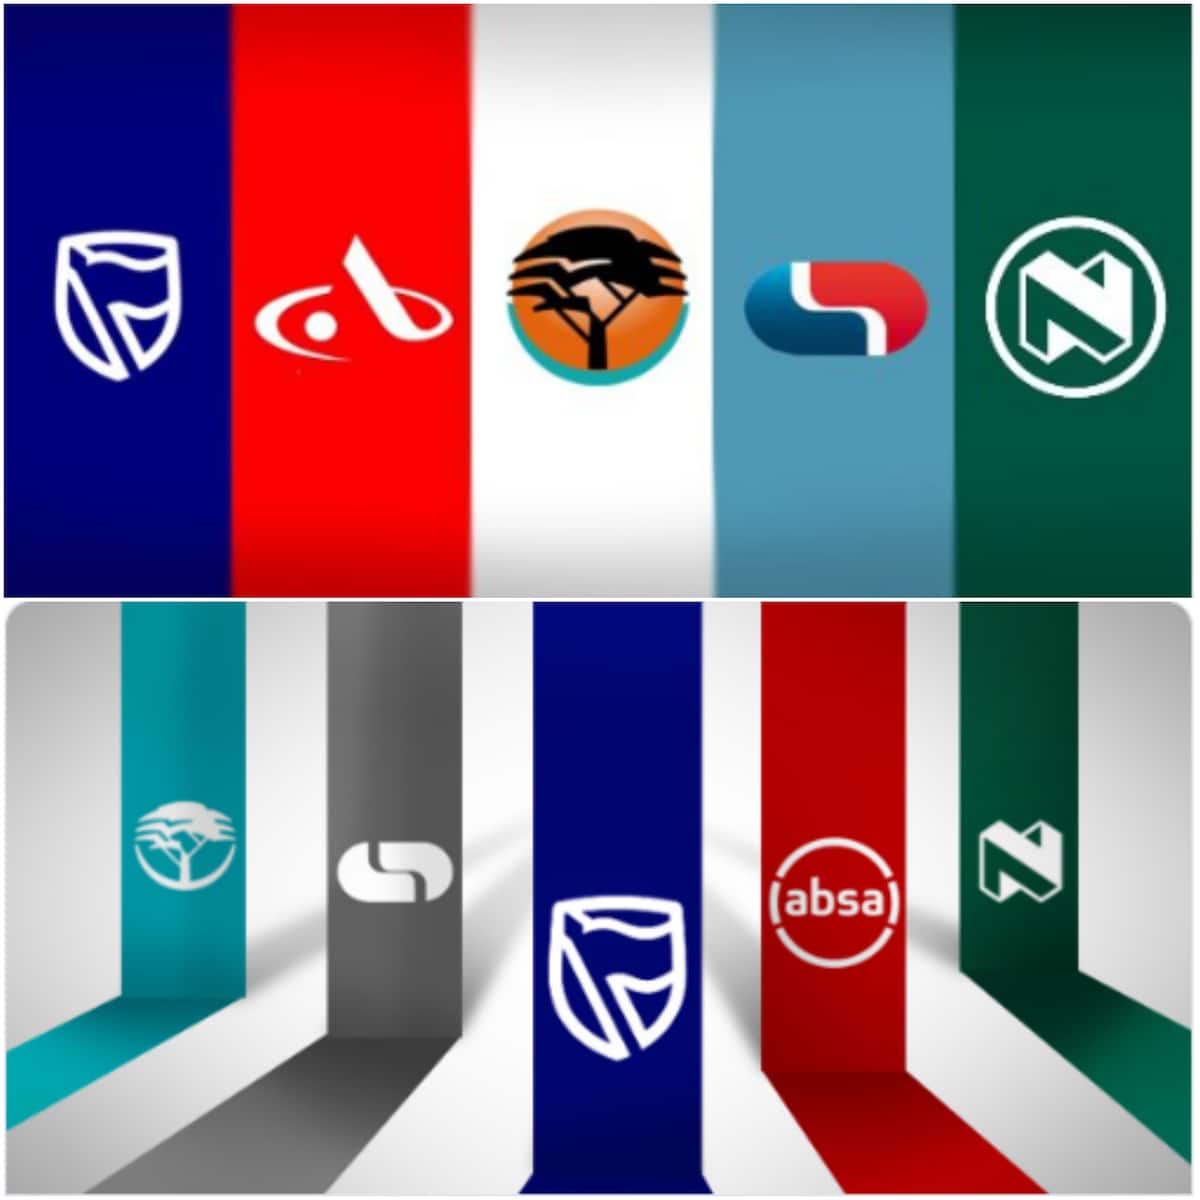 Fnb Absa Nedbank Find Out Where These Banks Fall On The List Of